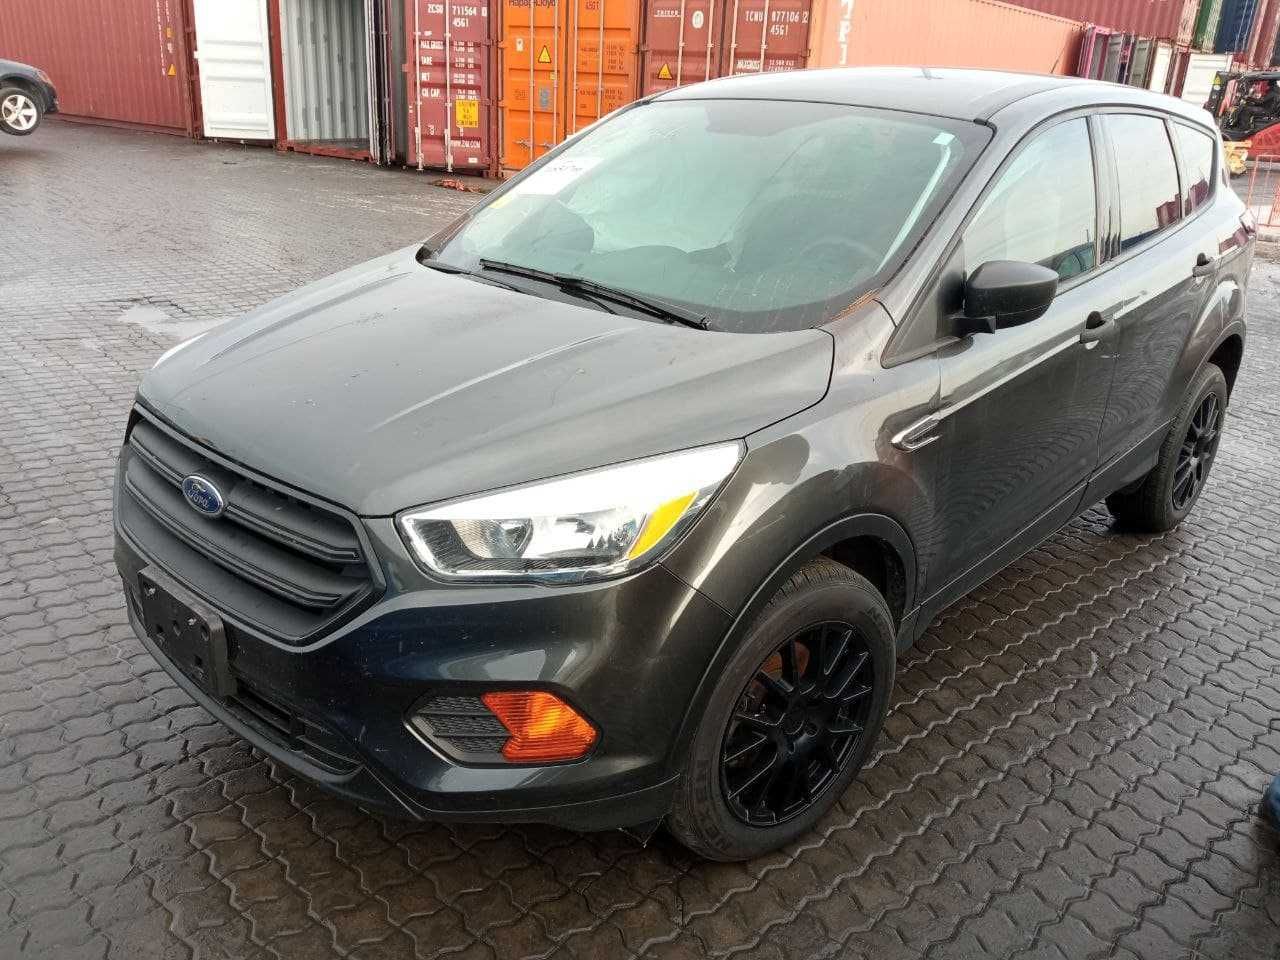 FORD ESCAPE S 2017 2.5 разборка Форд ескейп 2017год 2.5